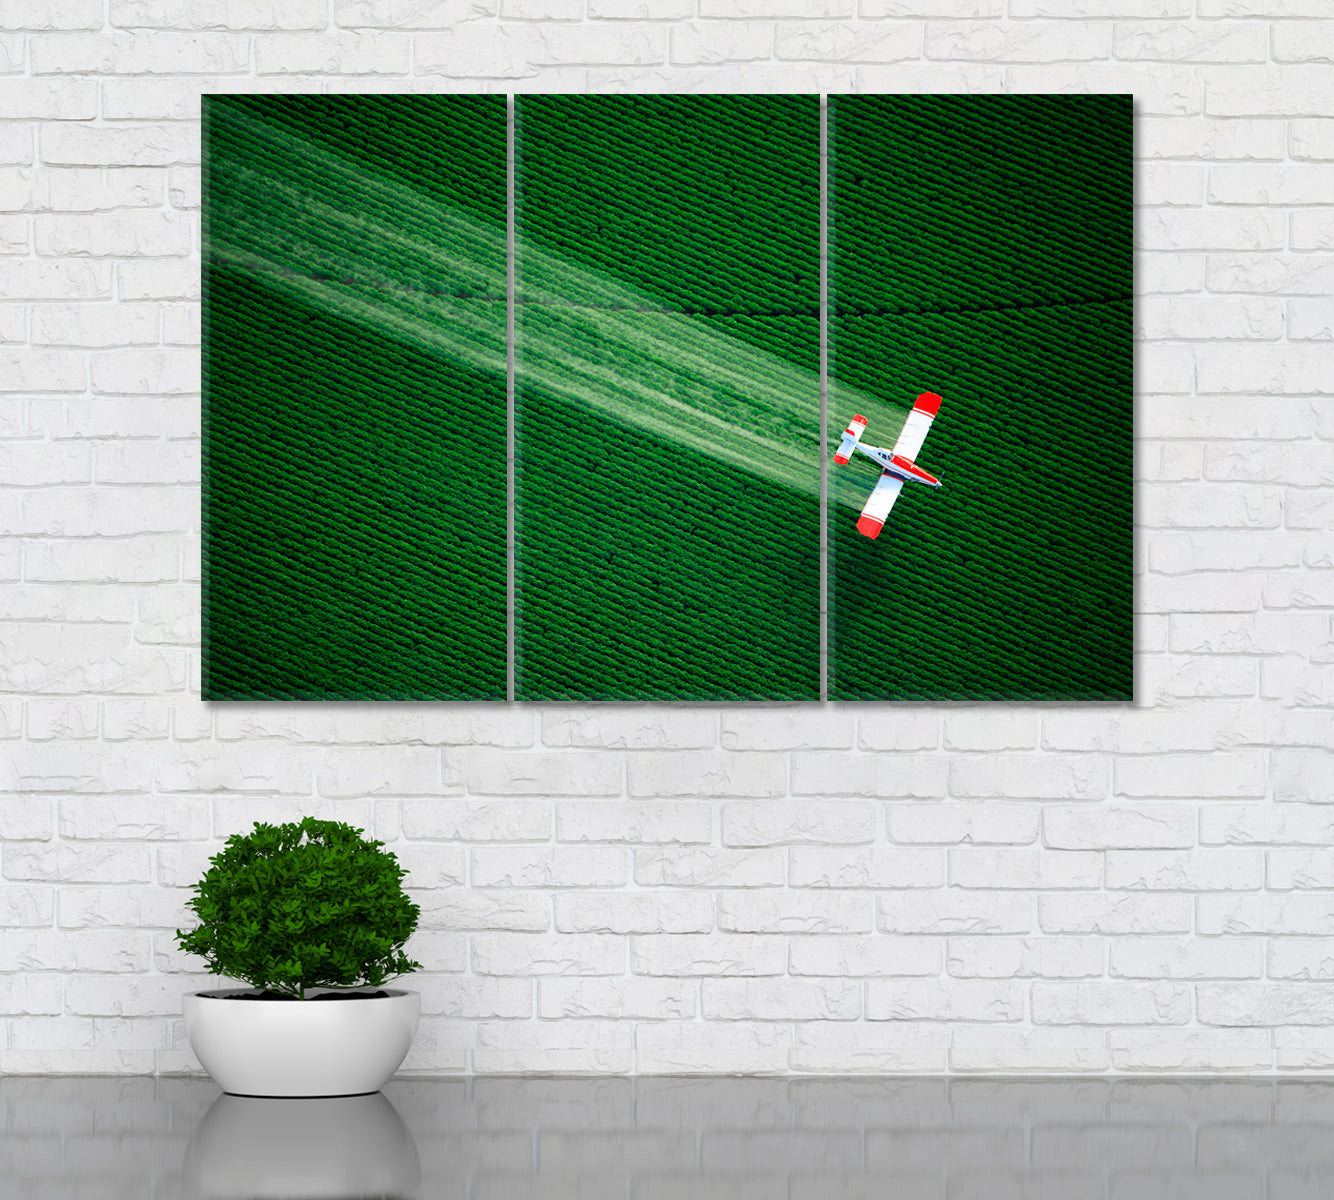 Agricultural Plane over Green Fields in Idaho Canvas Print ArtLexy 3 Panels 36"x24" inches 